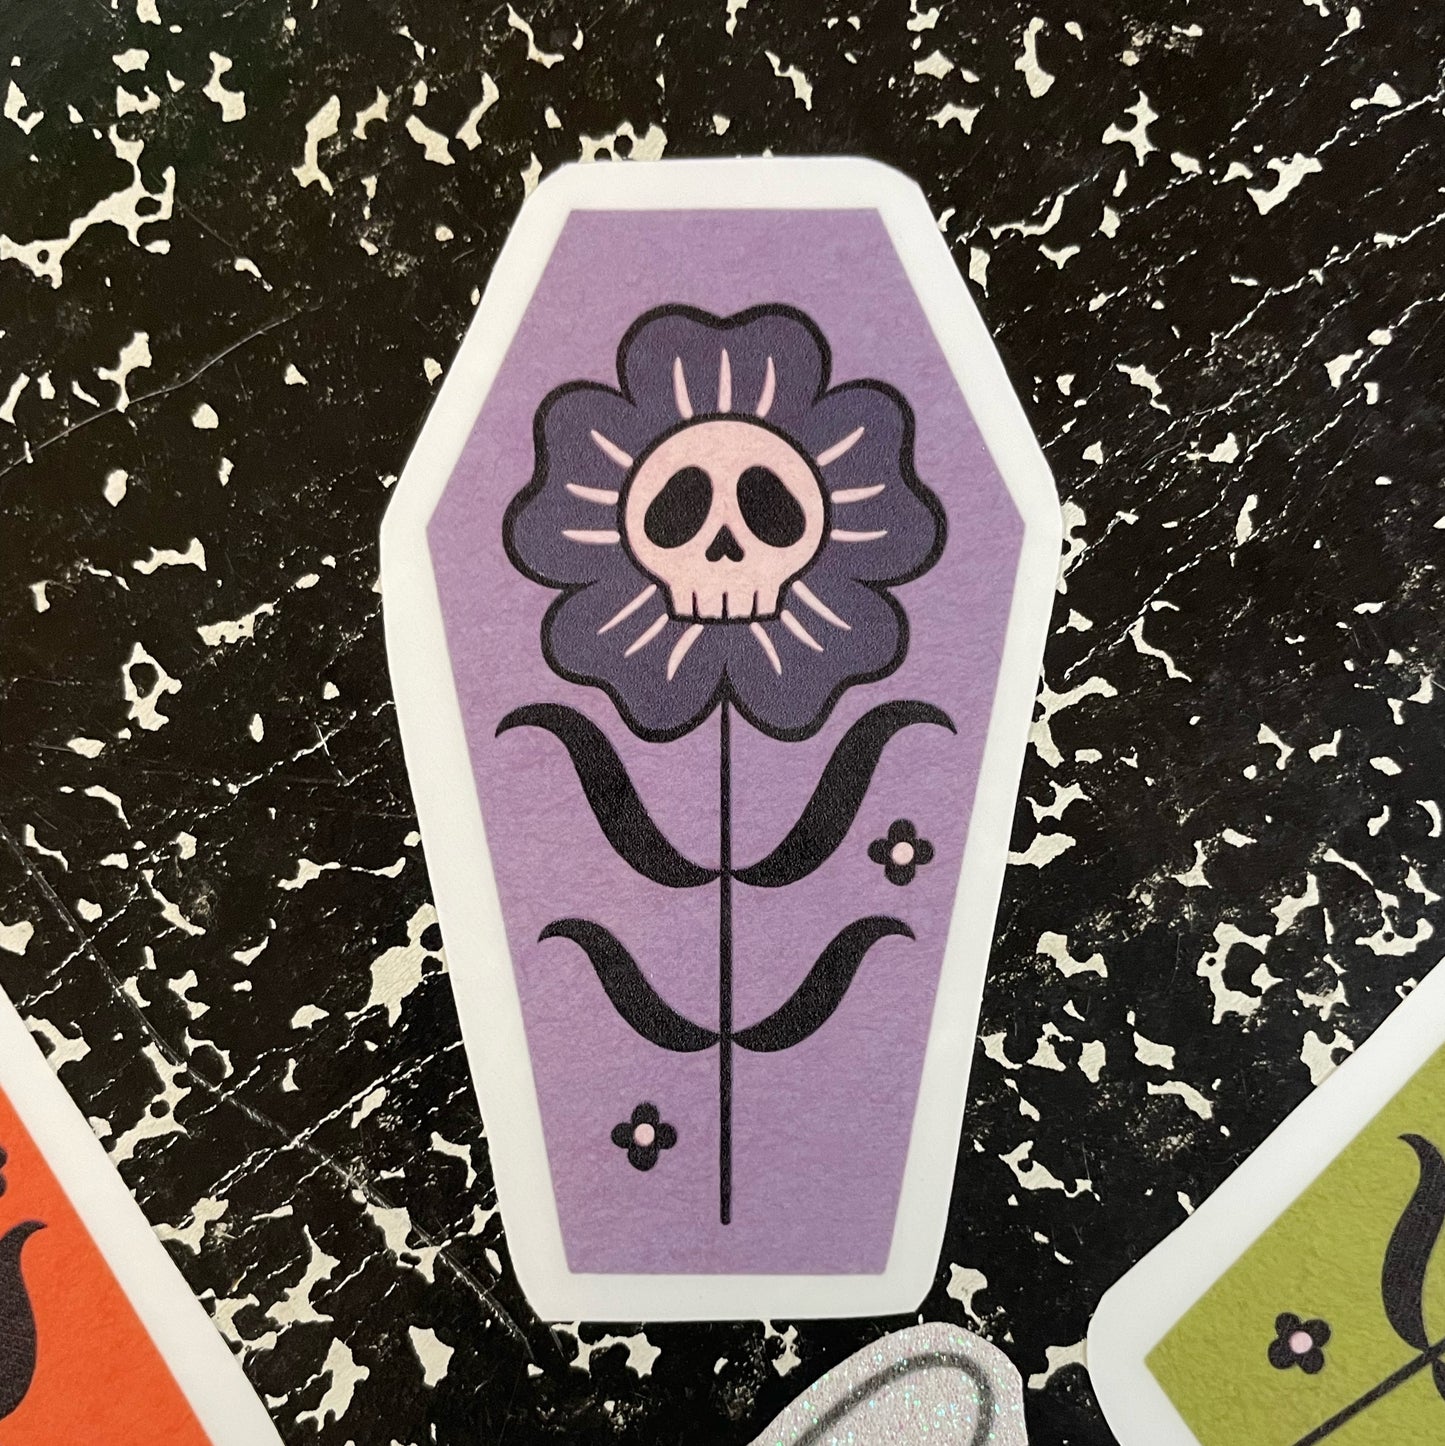 A coffin shaped sticker with a lavender gray background, featuring a black and gray flower with a skull in the center.